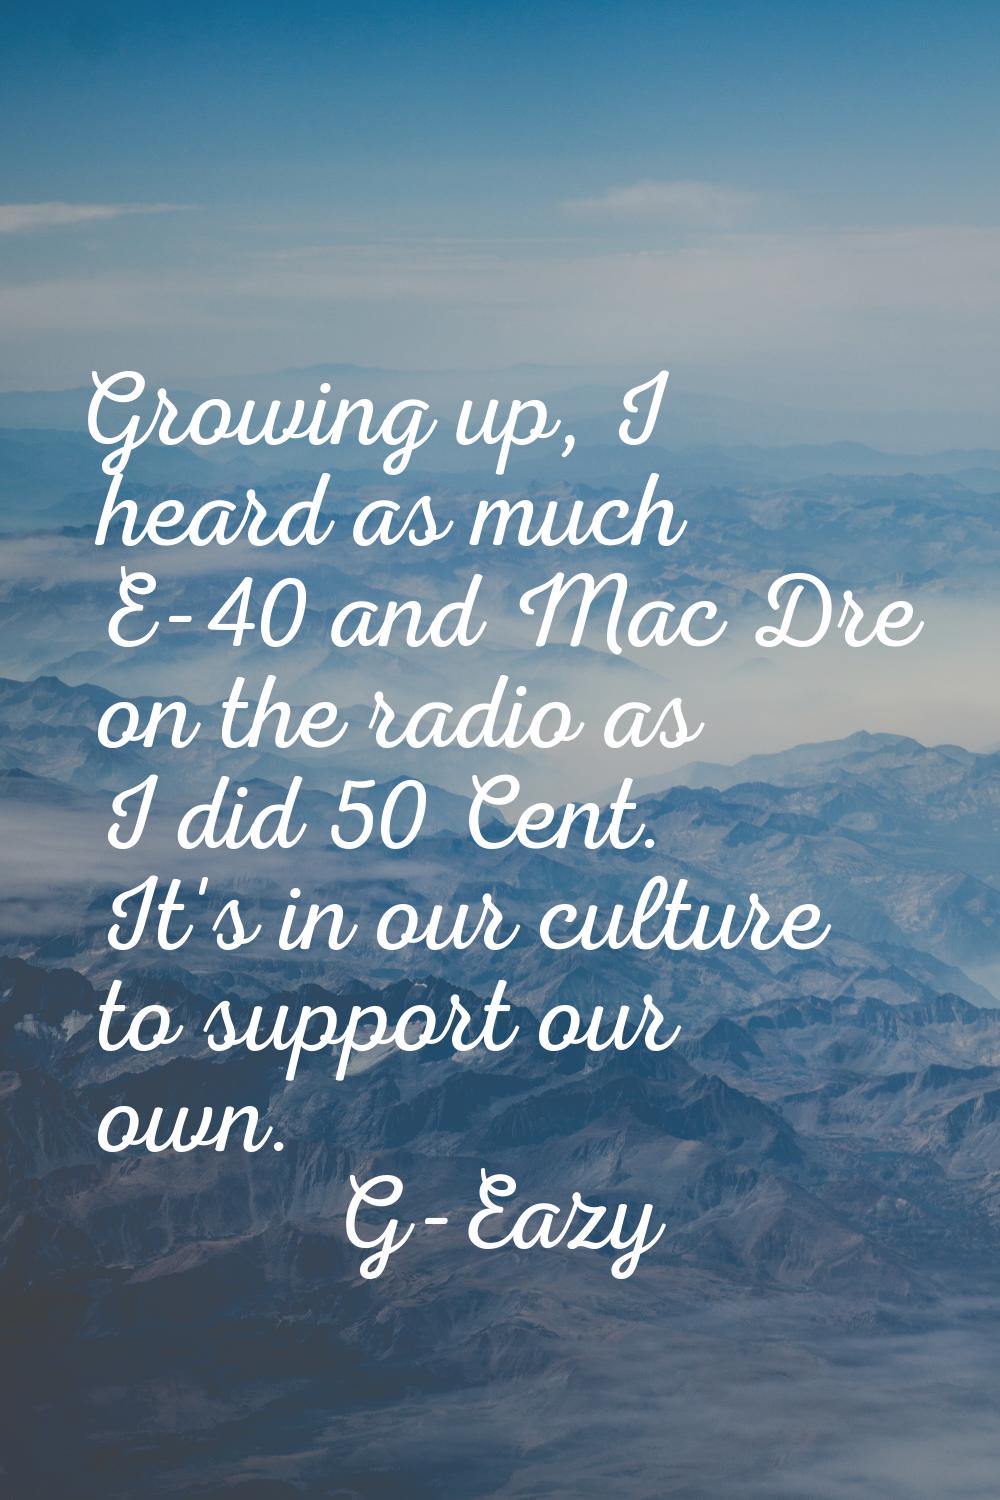 Growing up, I heard as much E-40 and Mac Dre on the radio as I did 50 Cent. It's in our culture to 